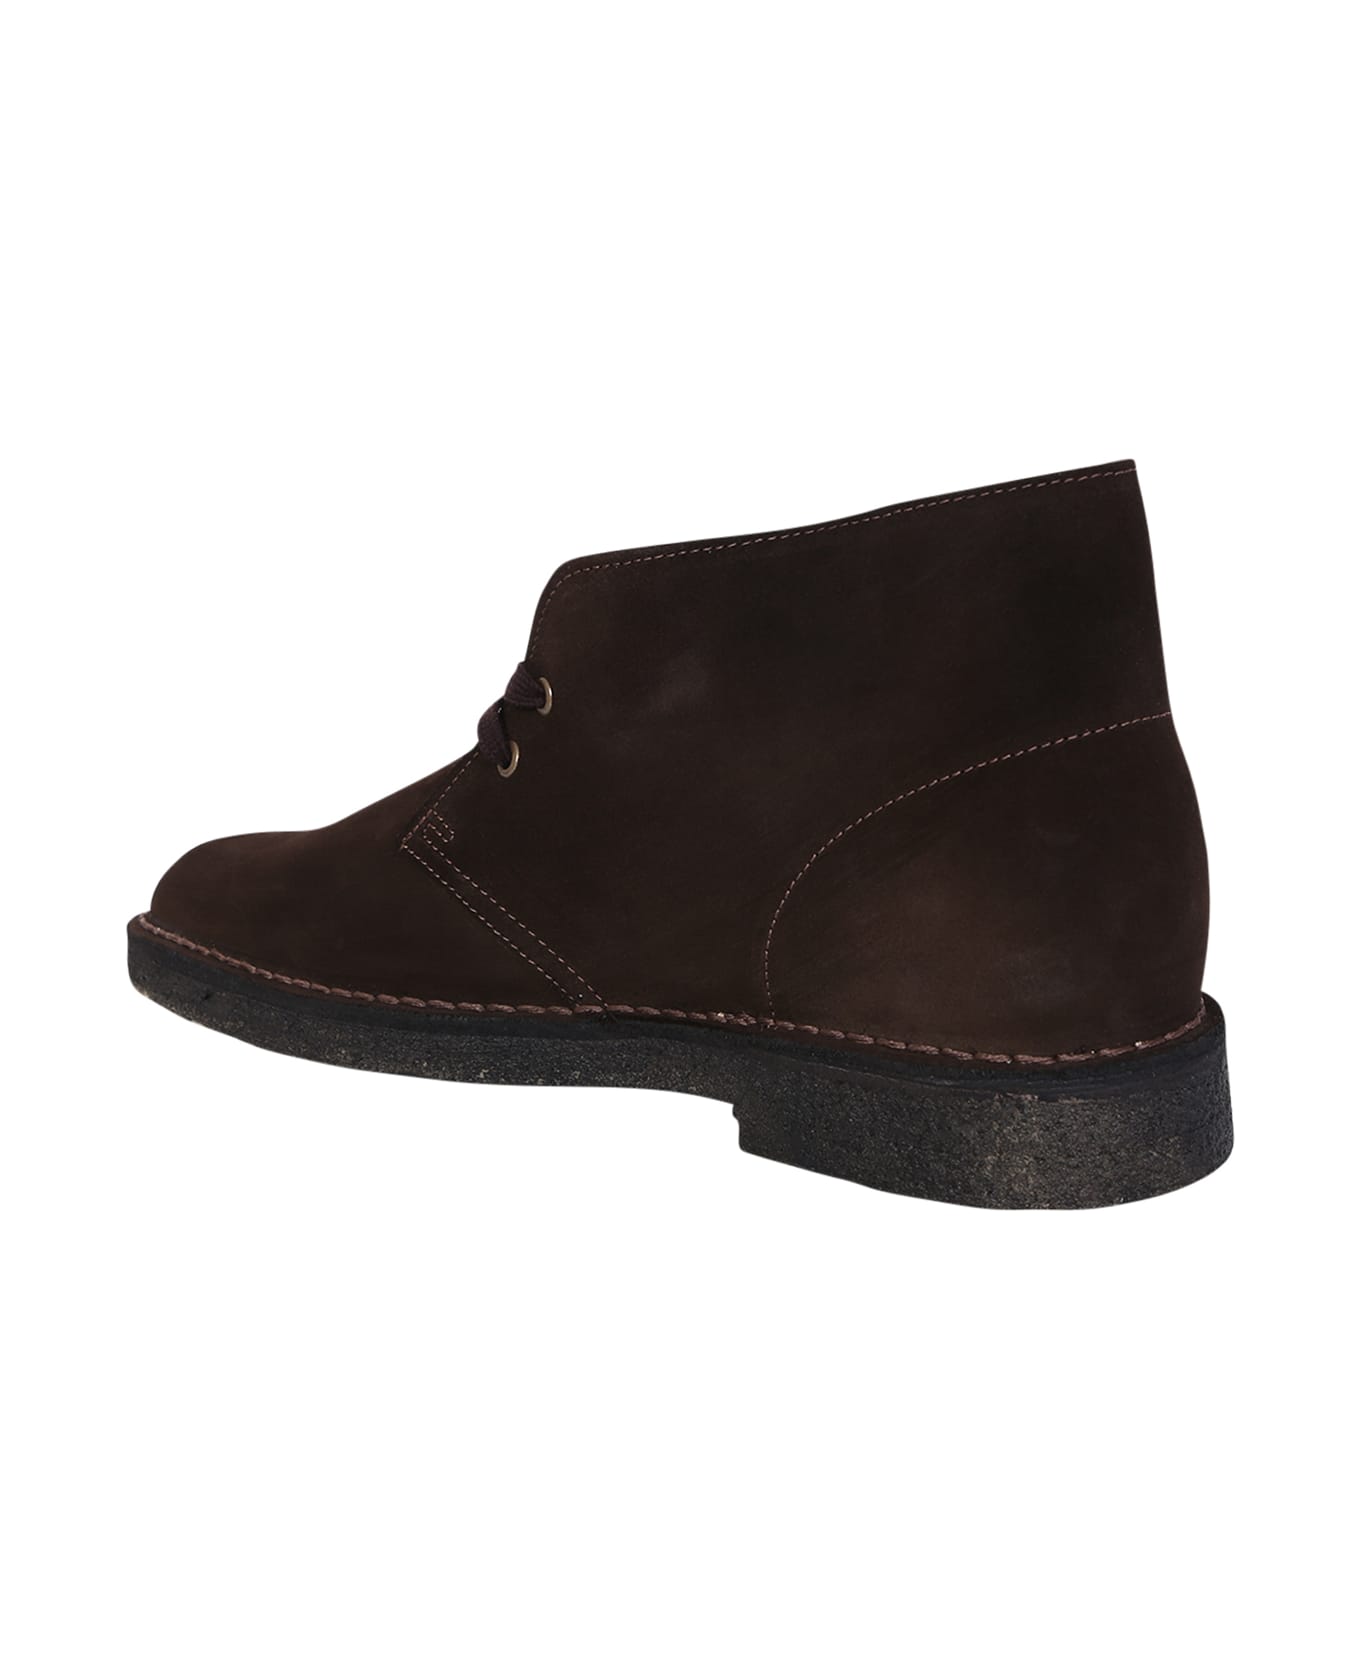 Clarks Boots - Brown ブーツ